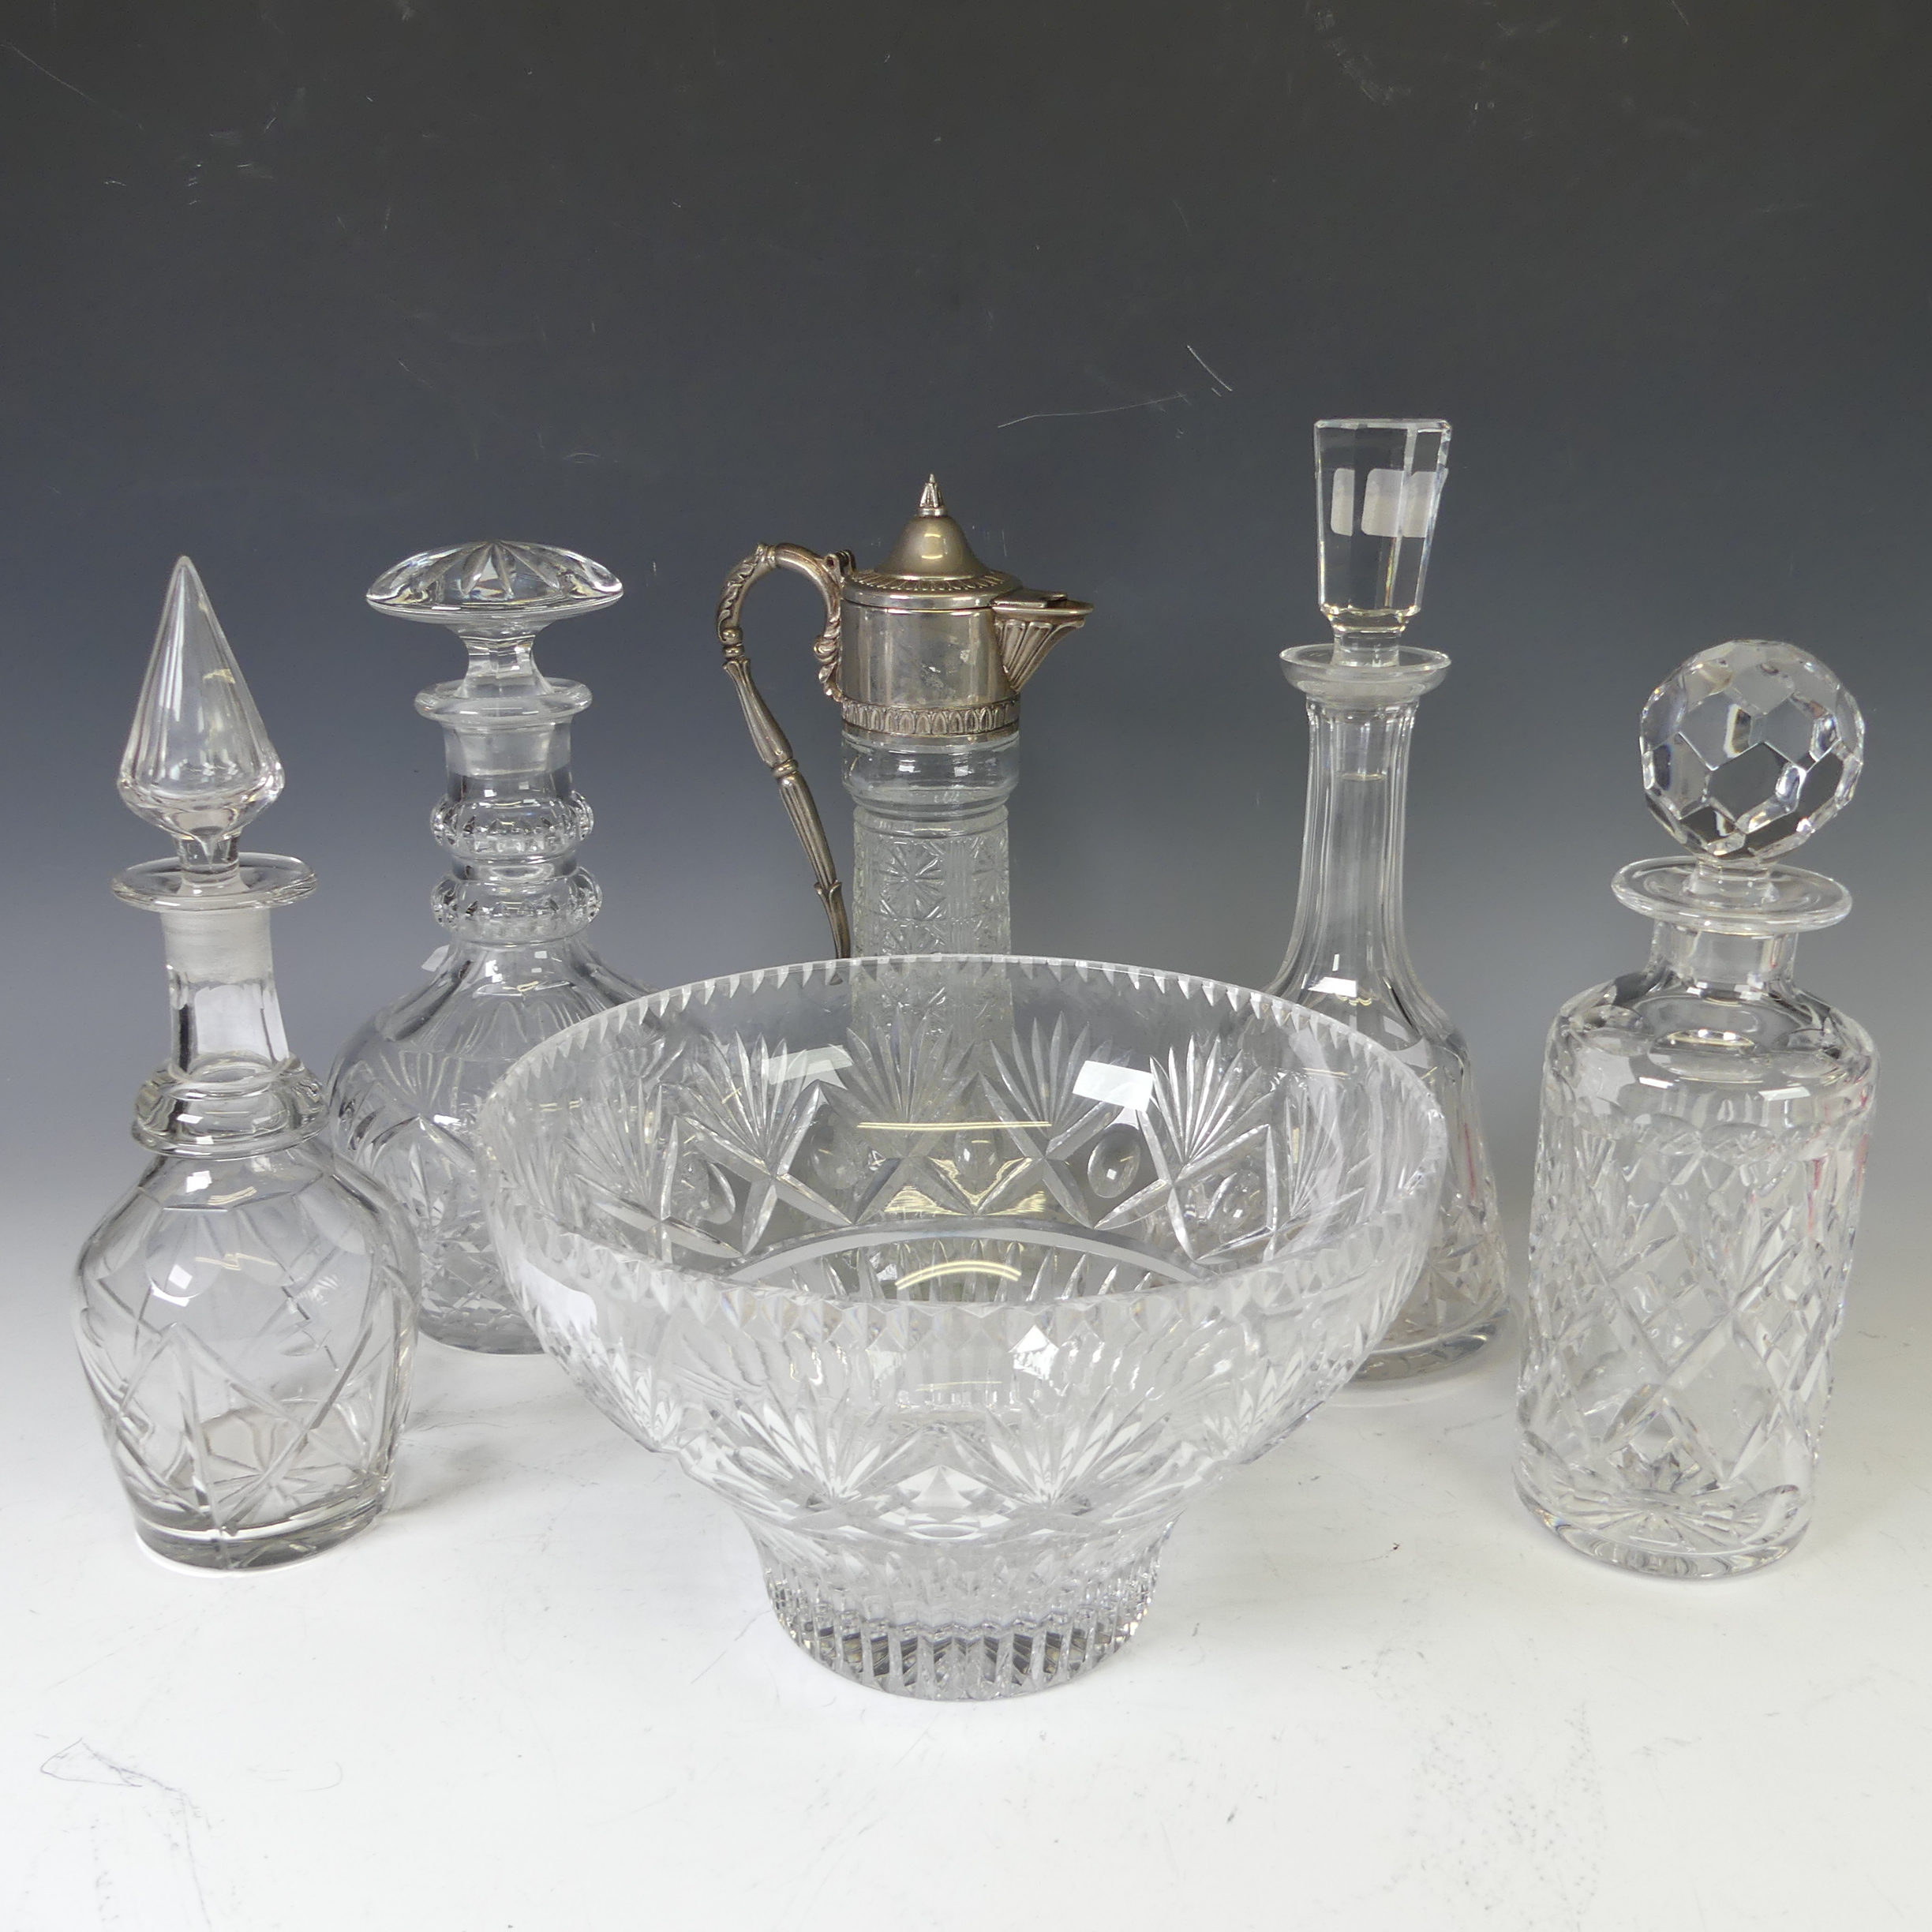 A quantity of cut Glass crystal, including four decanters, a fruit bowl and a claret jug (6)